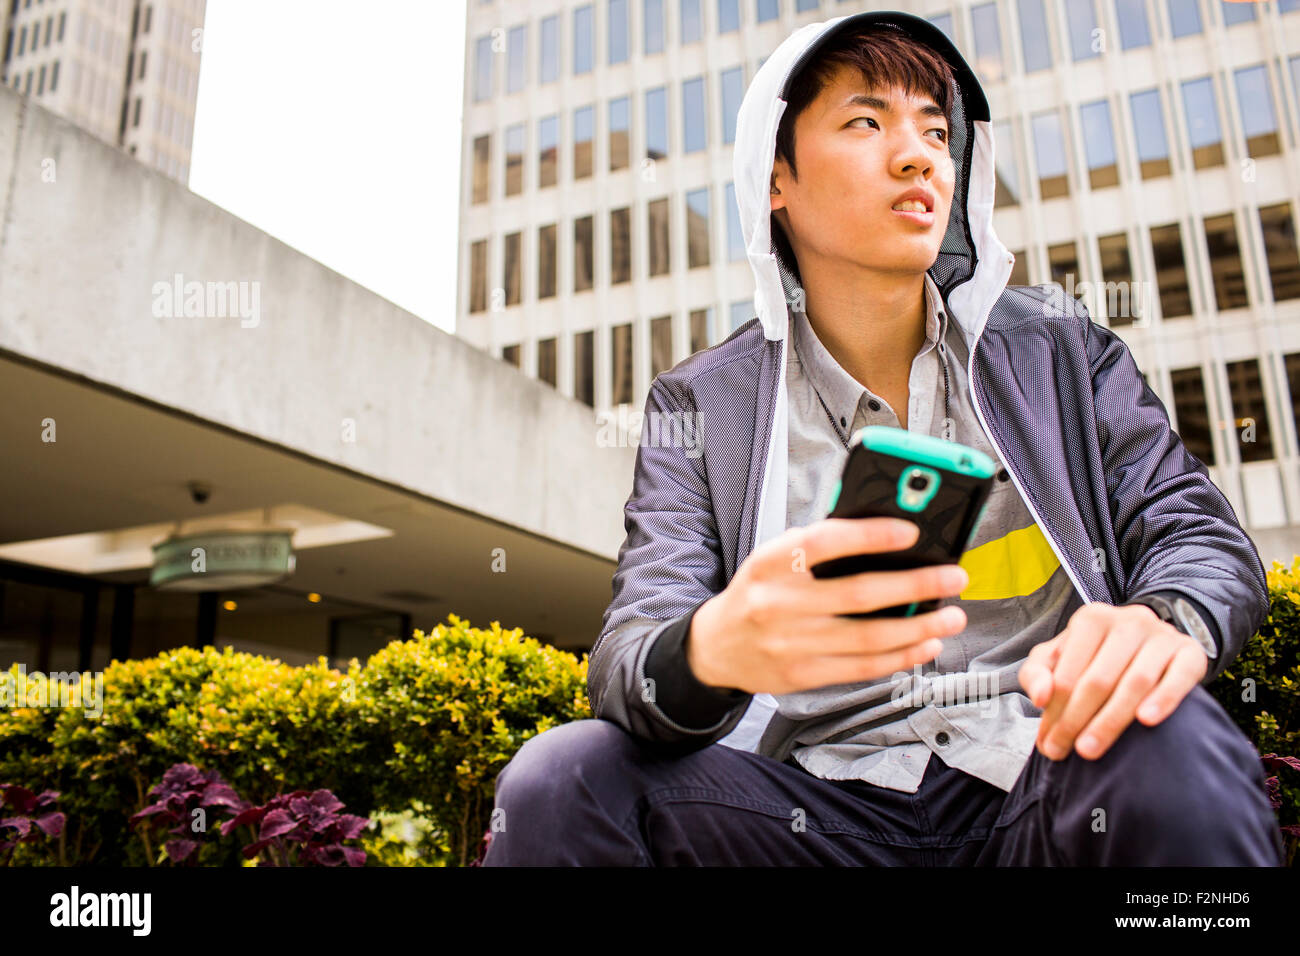 Asian man using cell phone in city Banque D'Images